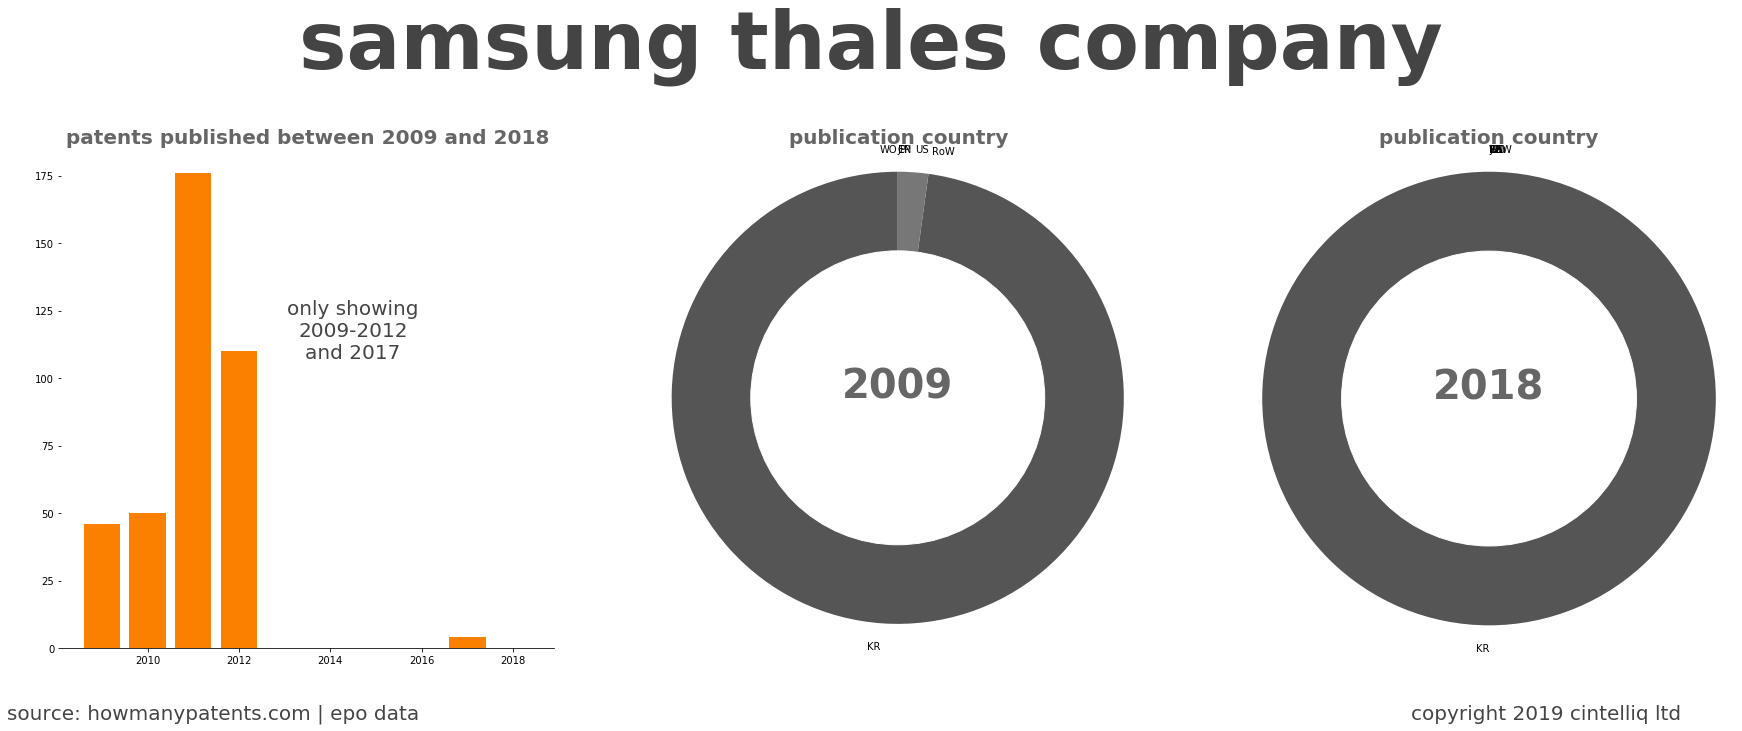 summary of patents for Samsung Thales Company